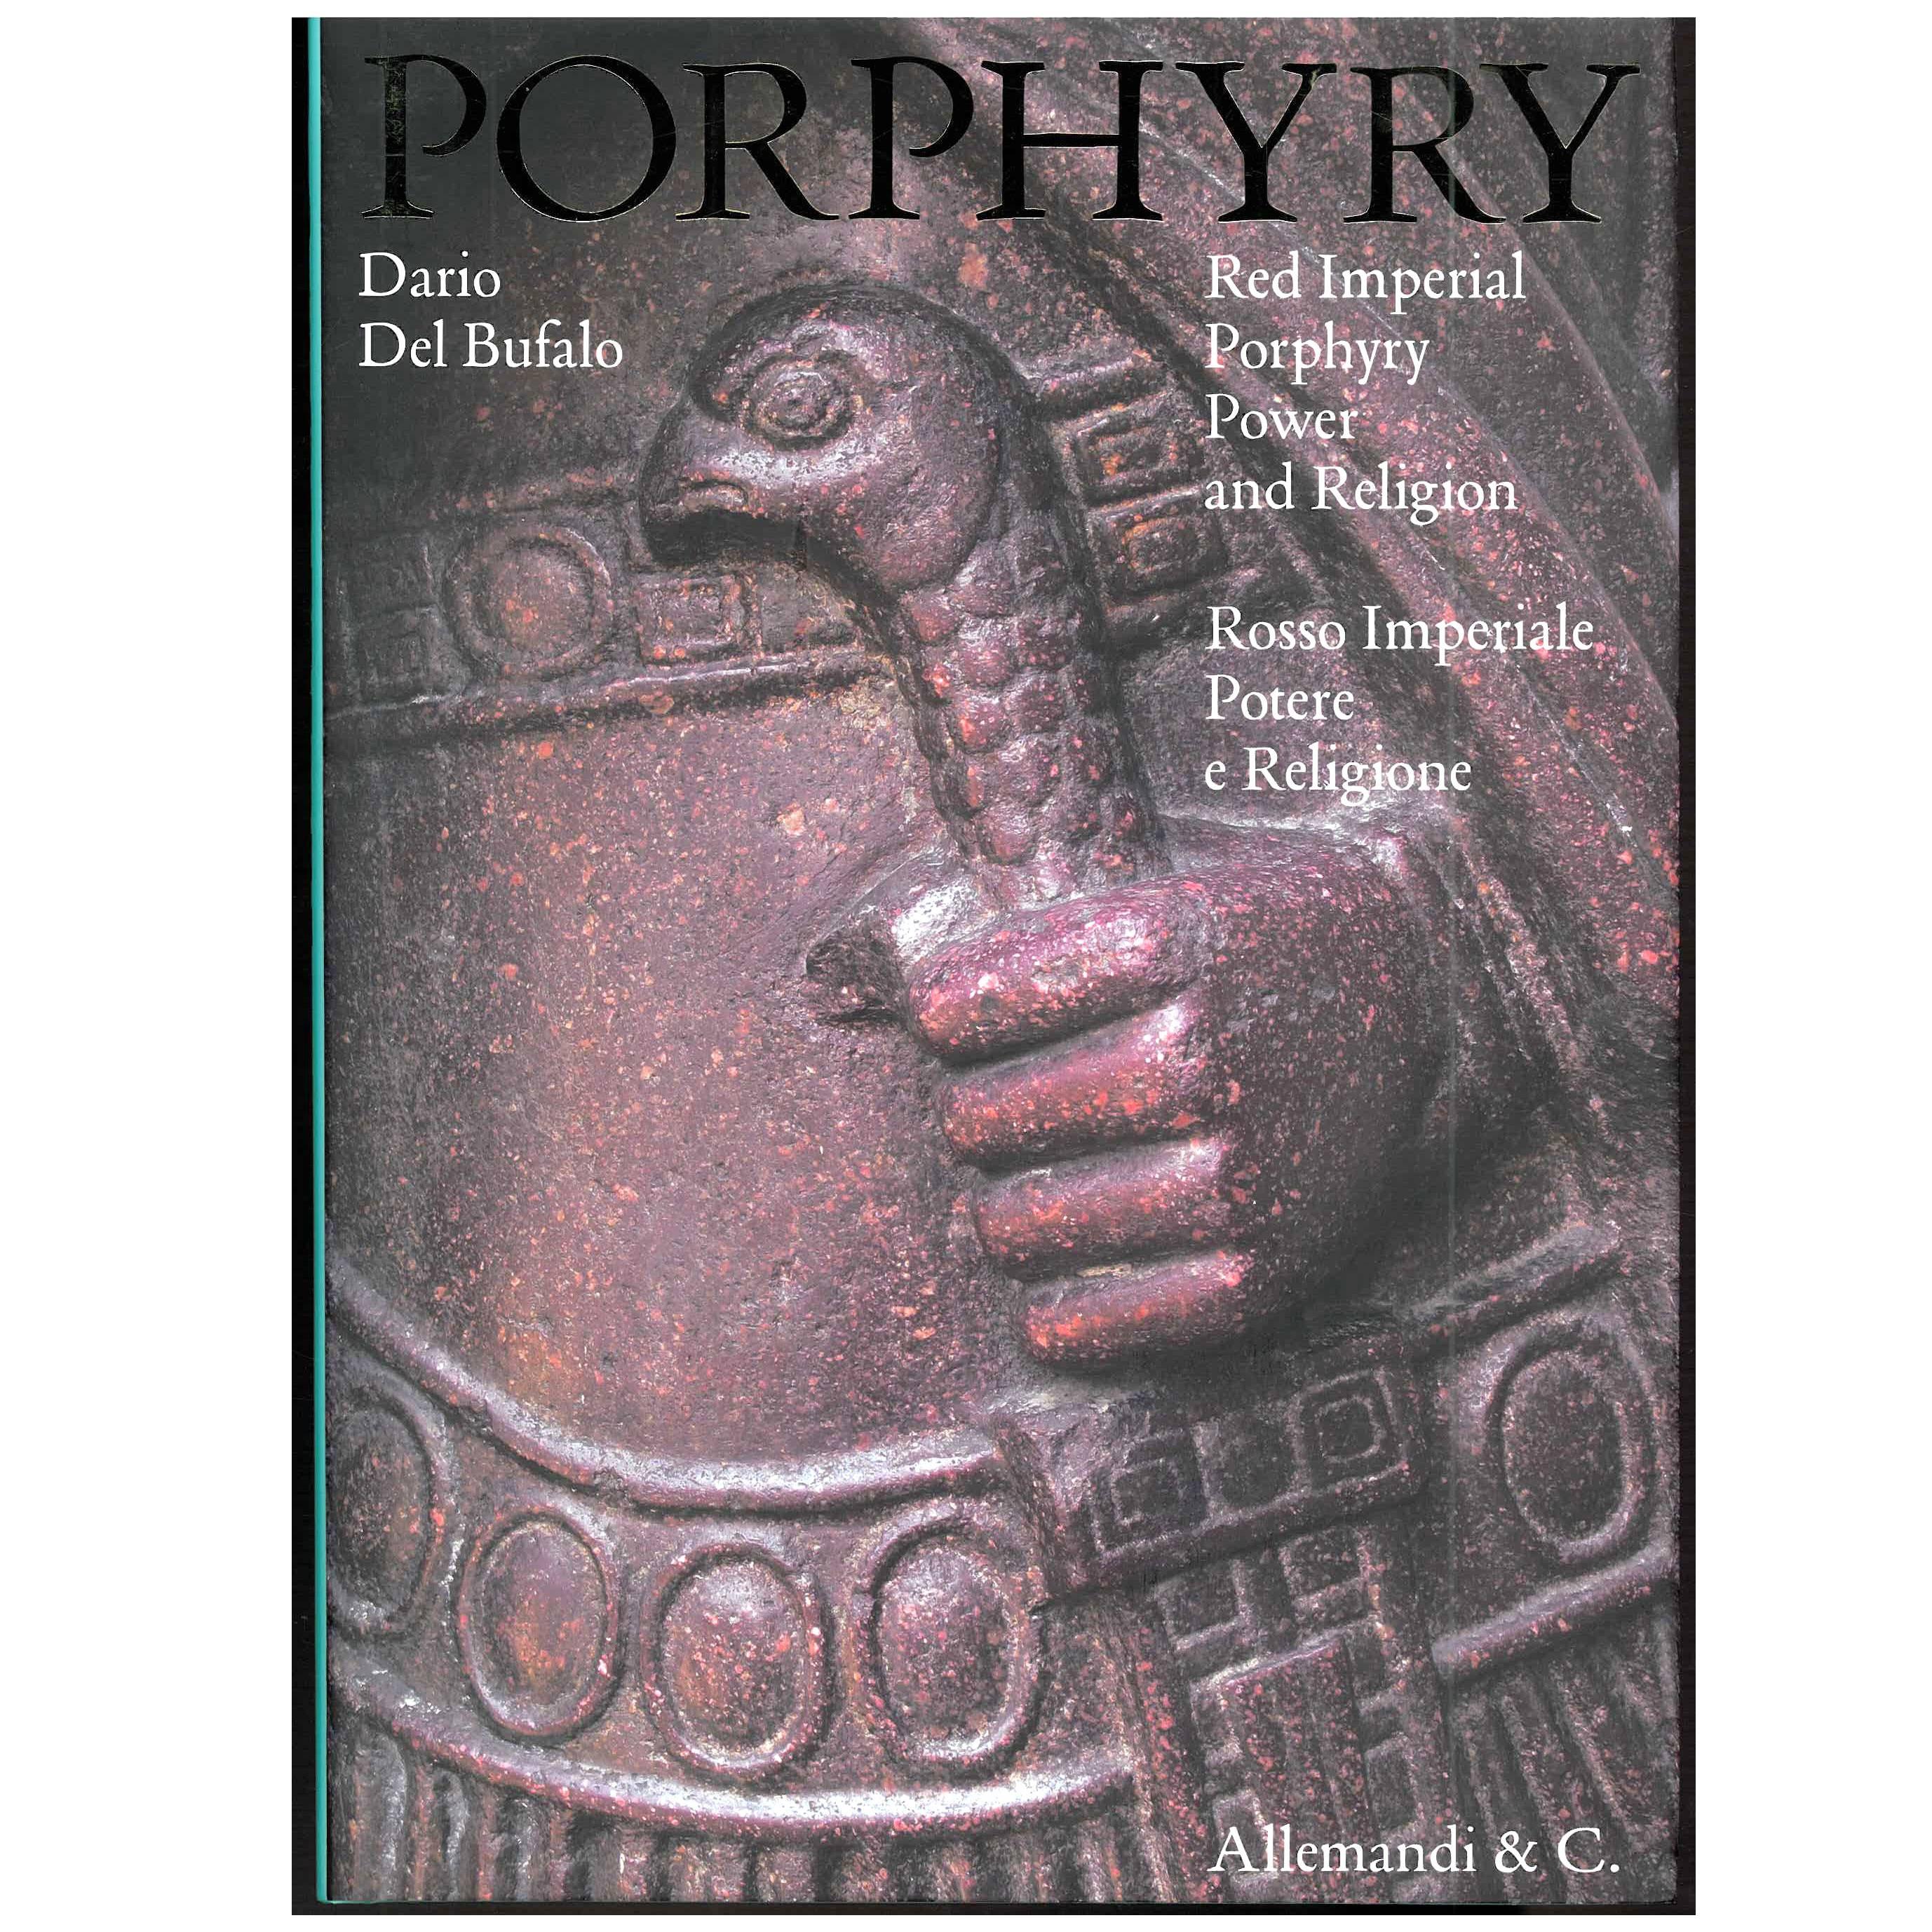 Porphyry: Red Imperial Porphyry Power and Religion (Book) For Sale